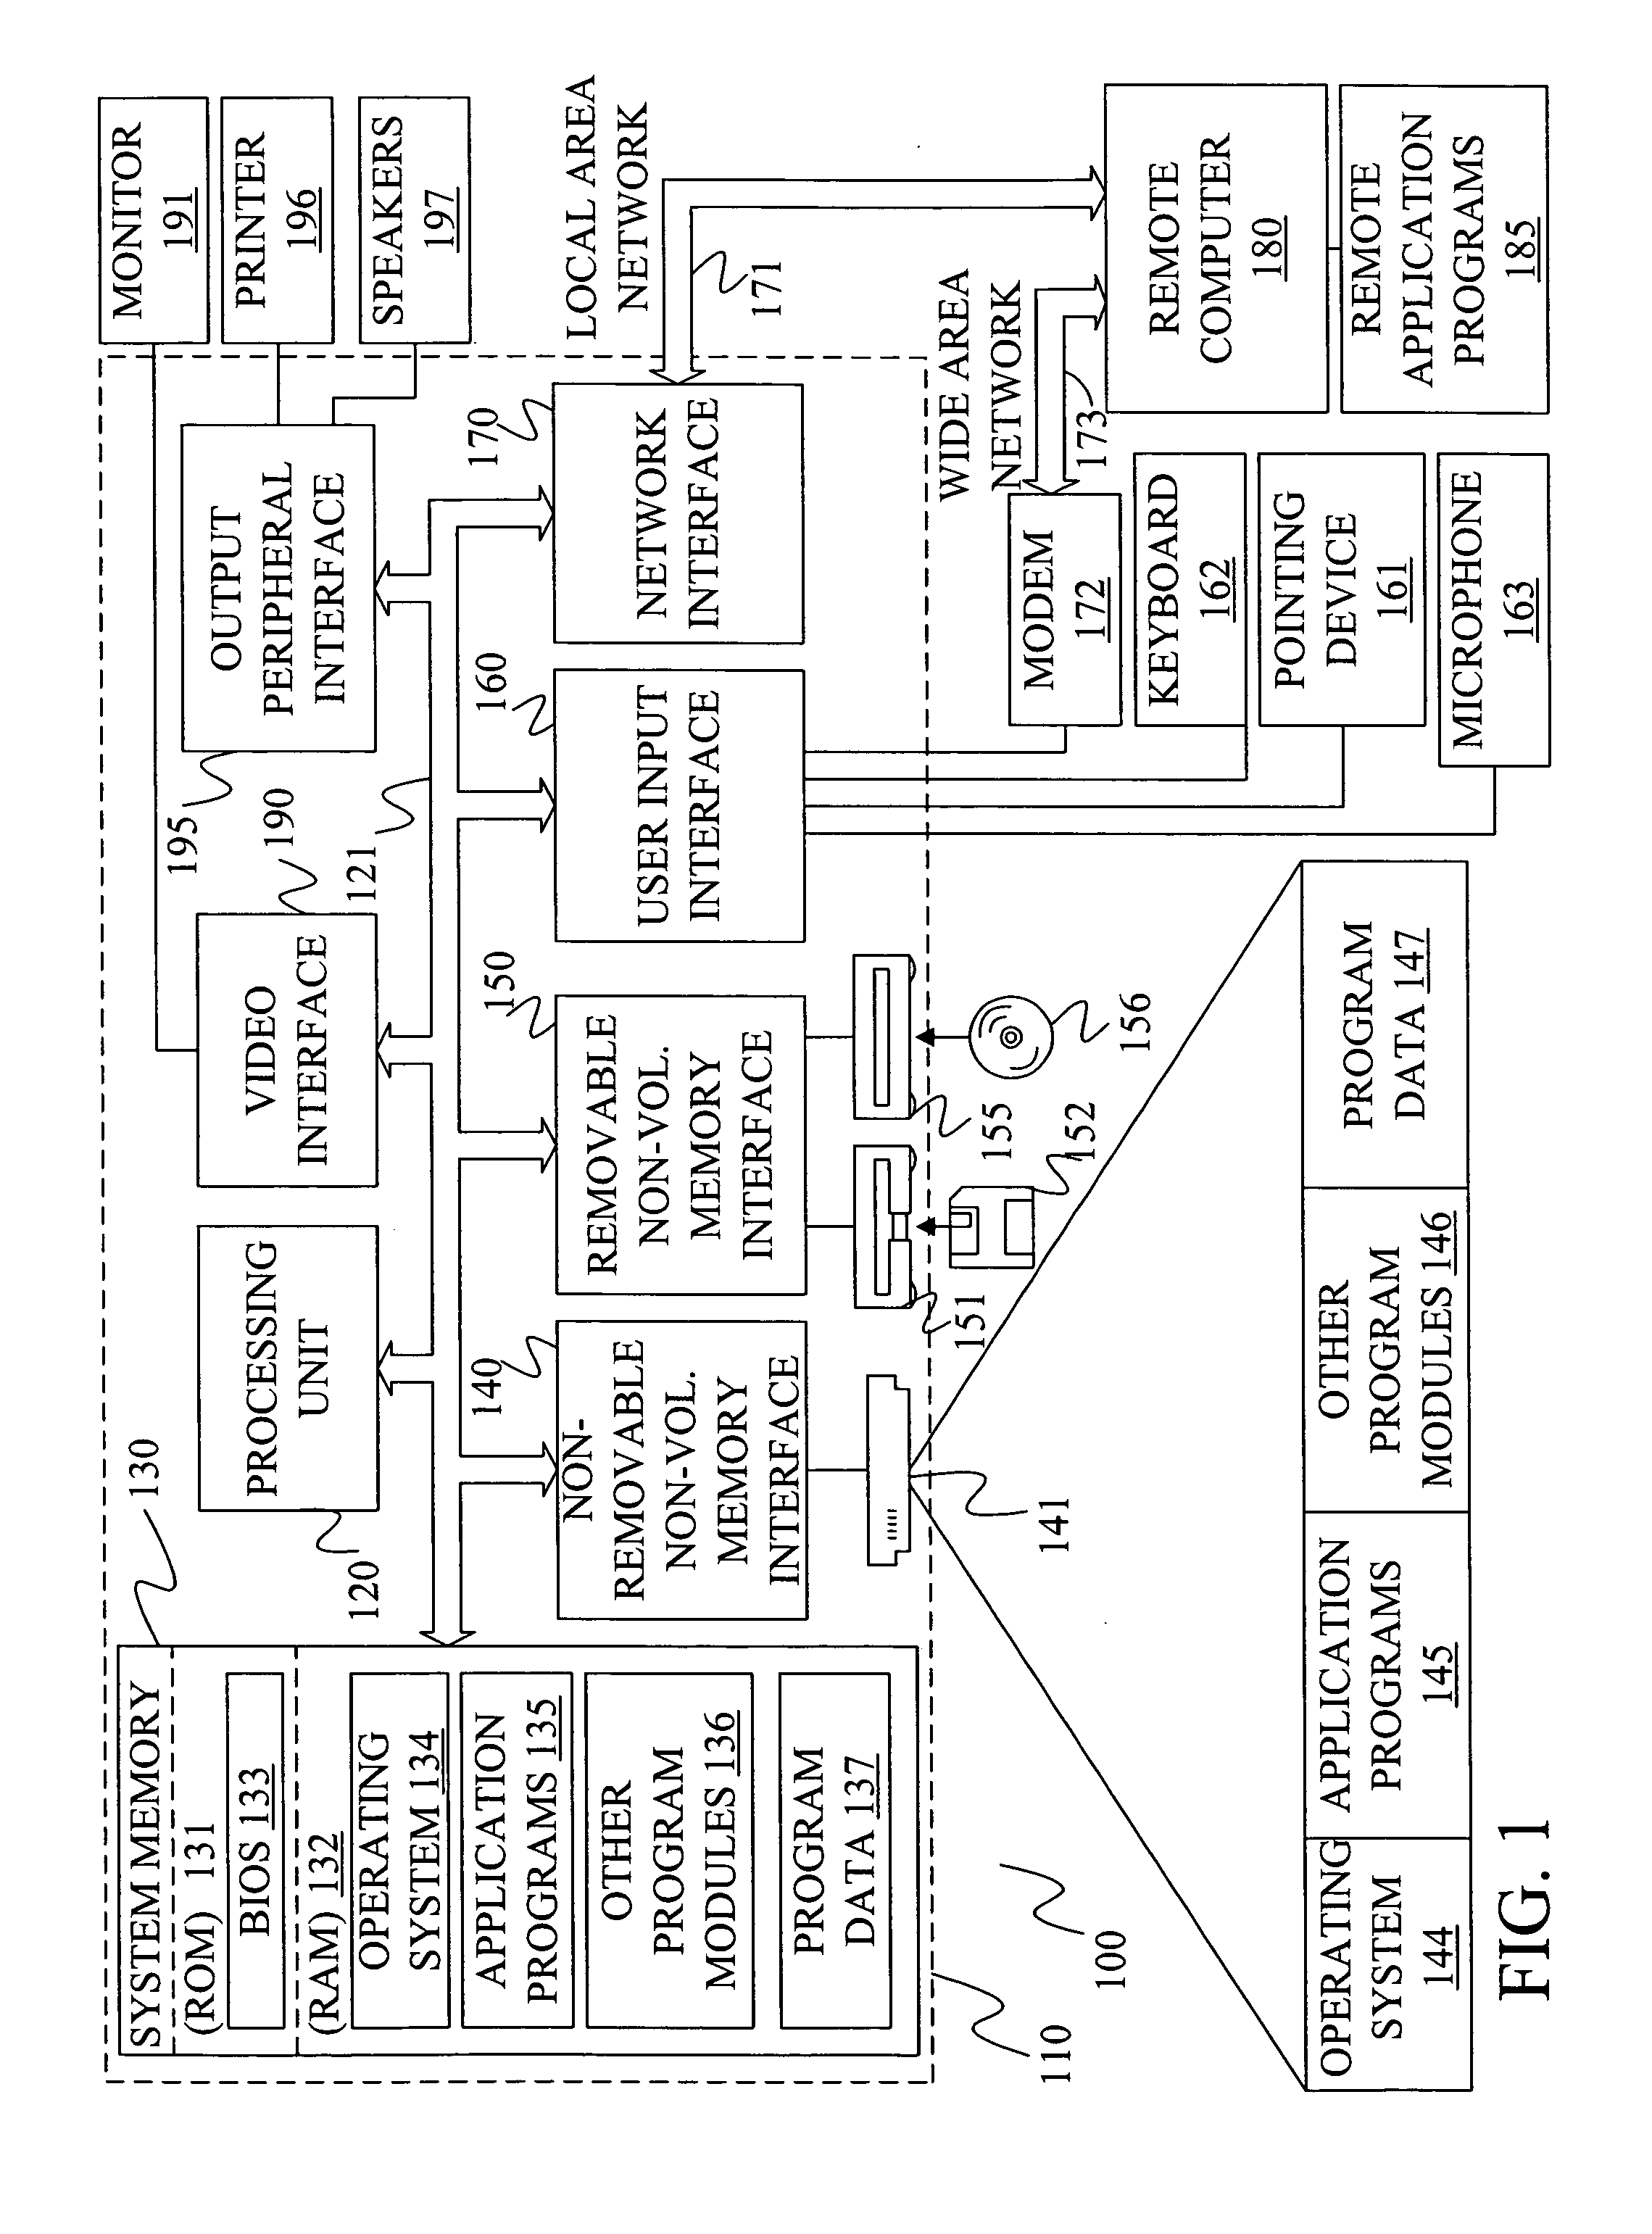 Method of determining uncertainty associated with acoustic distortion-based noise reduction